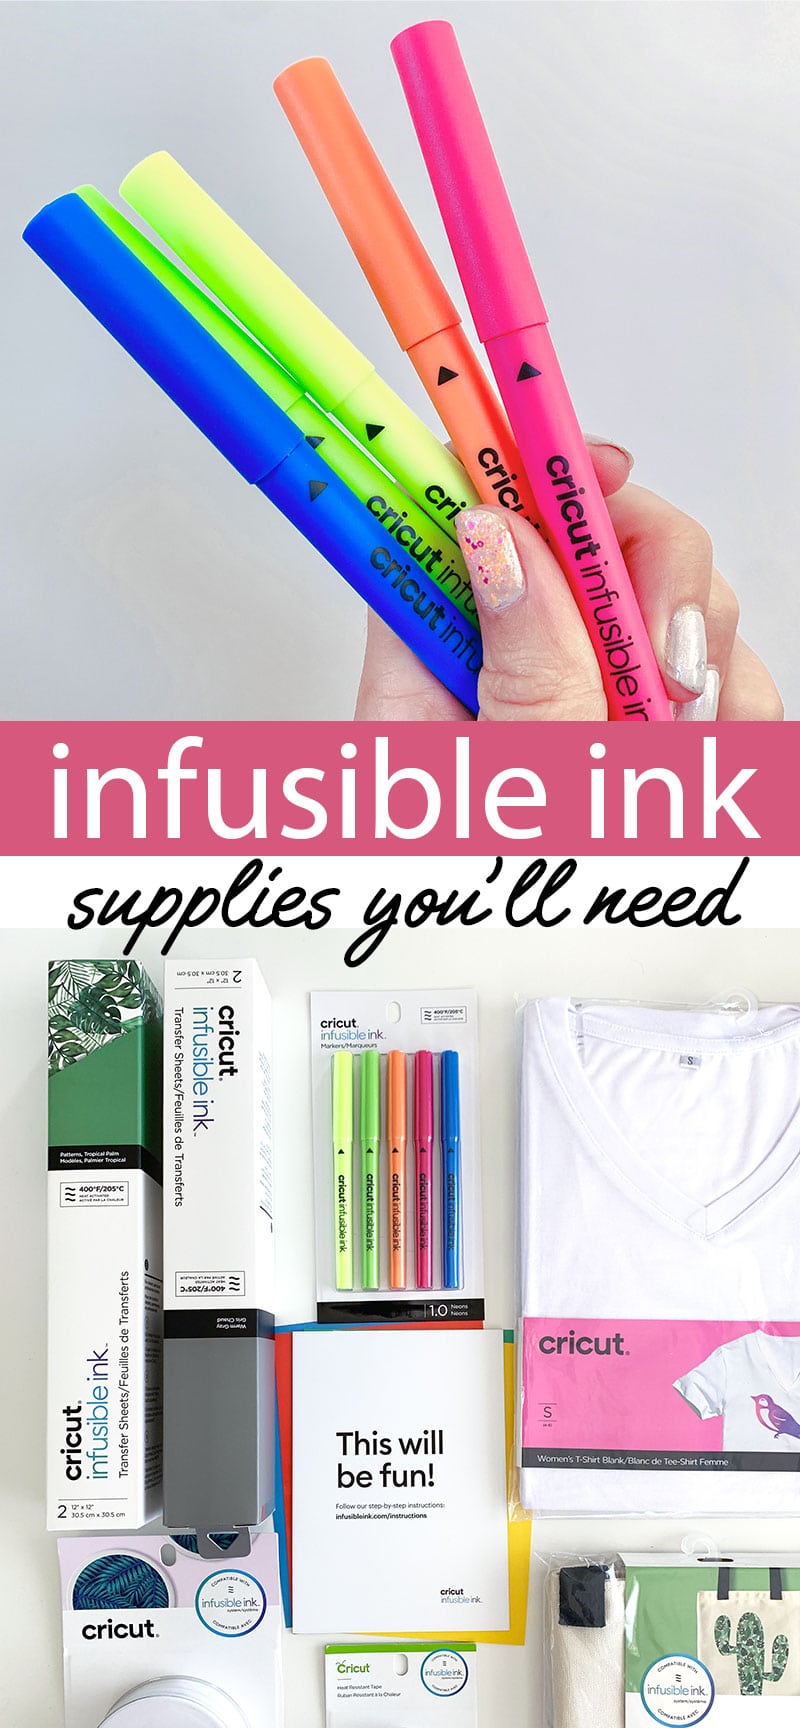 Cricut Infusible Ink: What Is It and How to Use It?